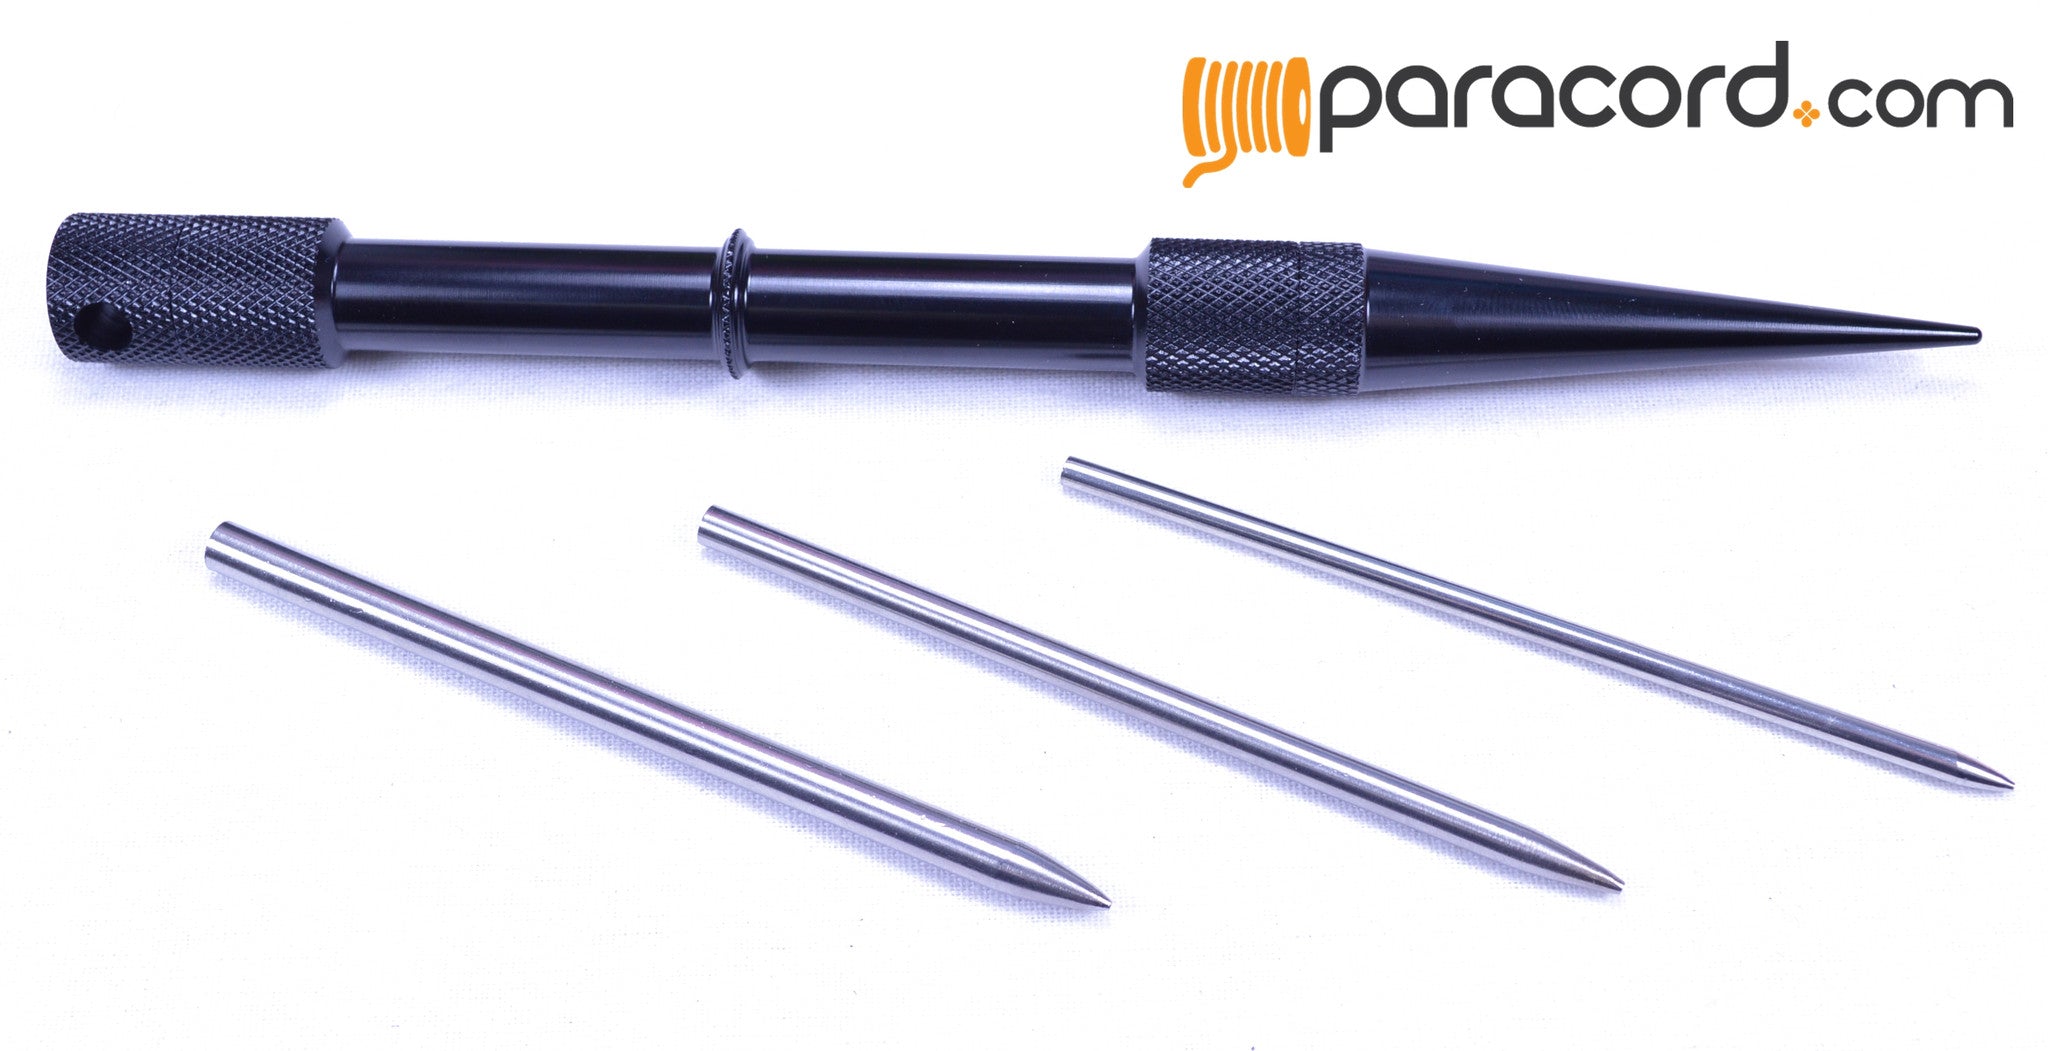 fid Paracord Knotter Tools Paracord FID Lacing Needles Paracord